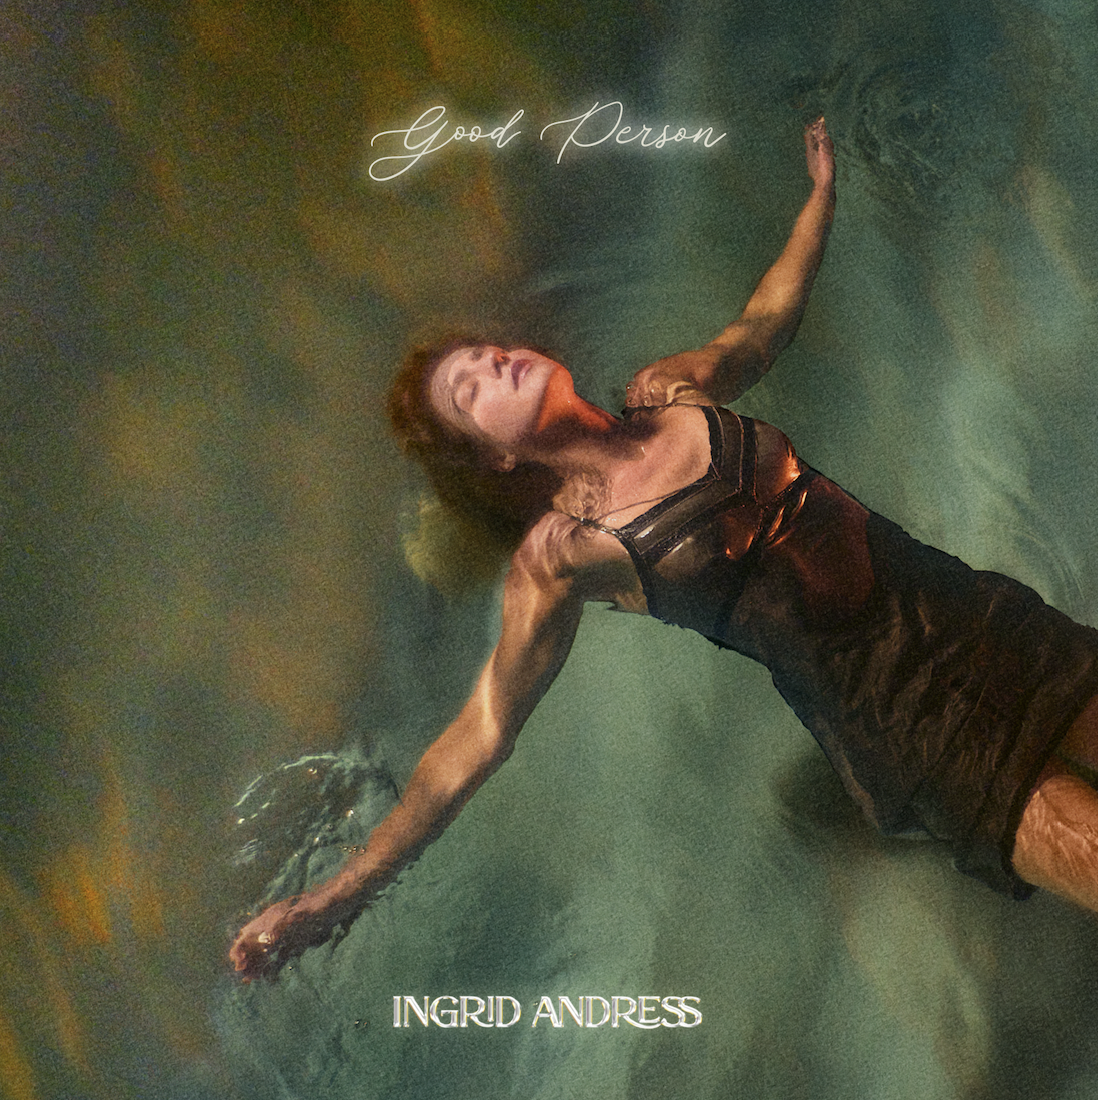 INGRID ANDRESS ANNOUNCES SOPHOMORE ALBUM GOOD PERSON OUT AUGUST 26TH